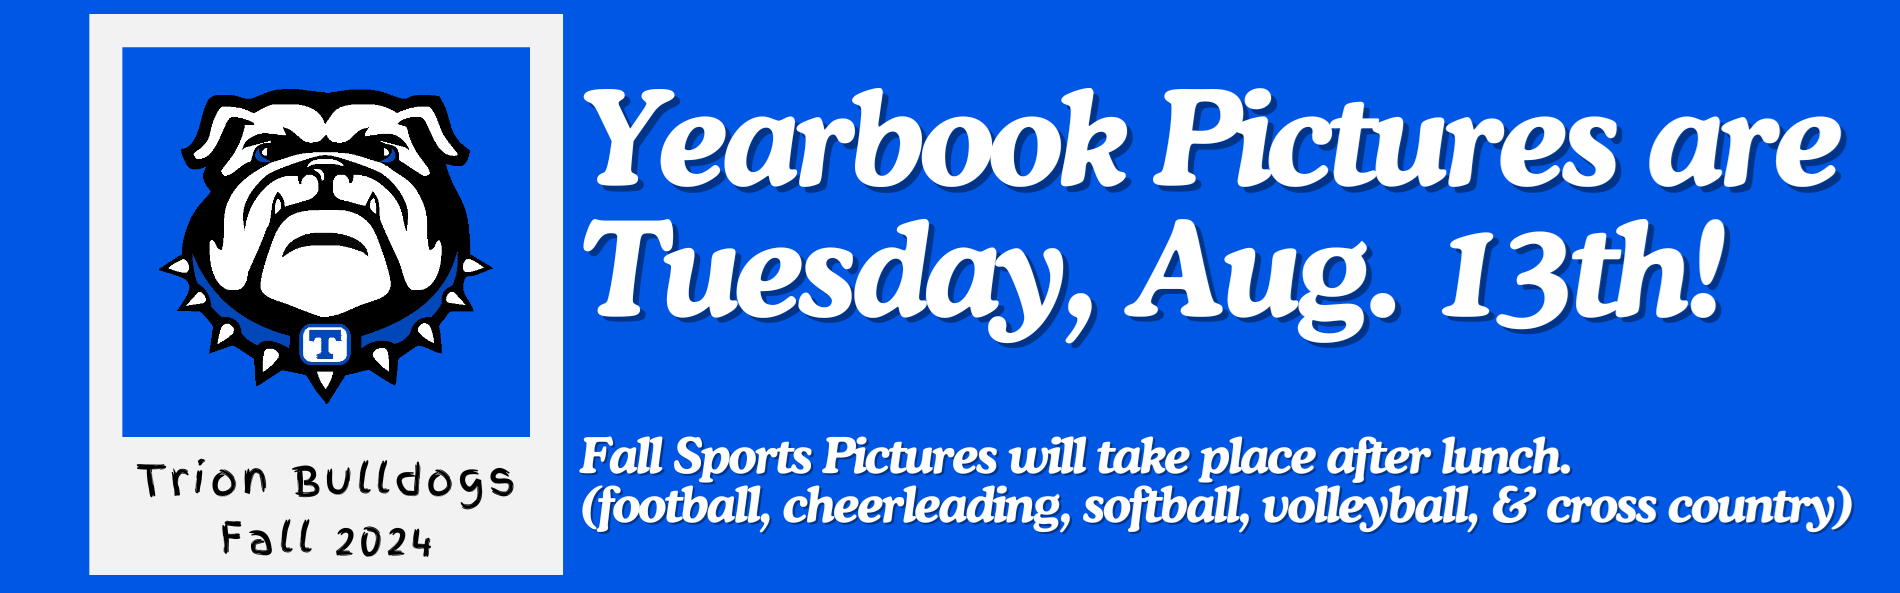 Yearbook/fall sports pictures are 8/13!